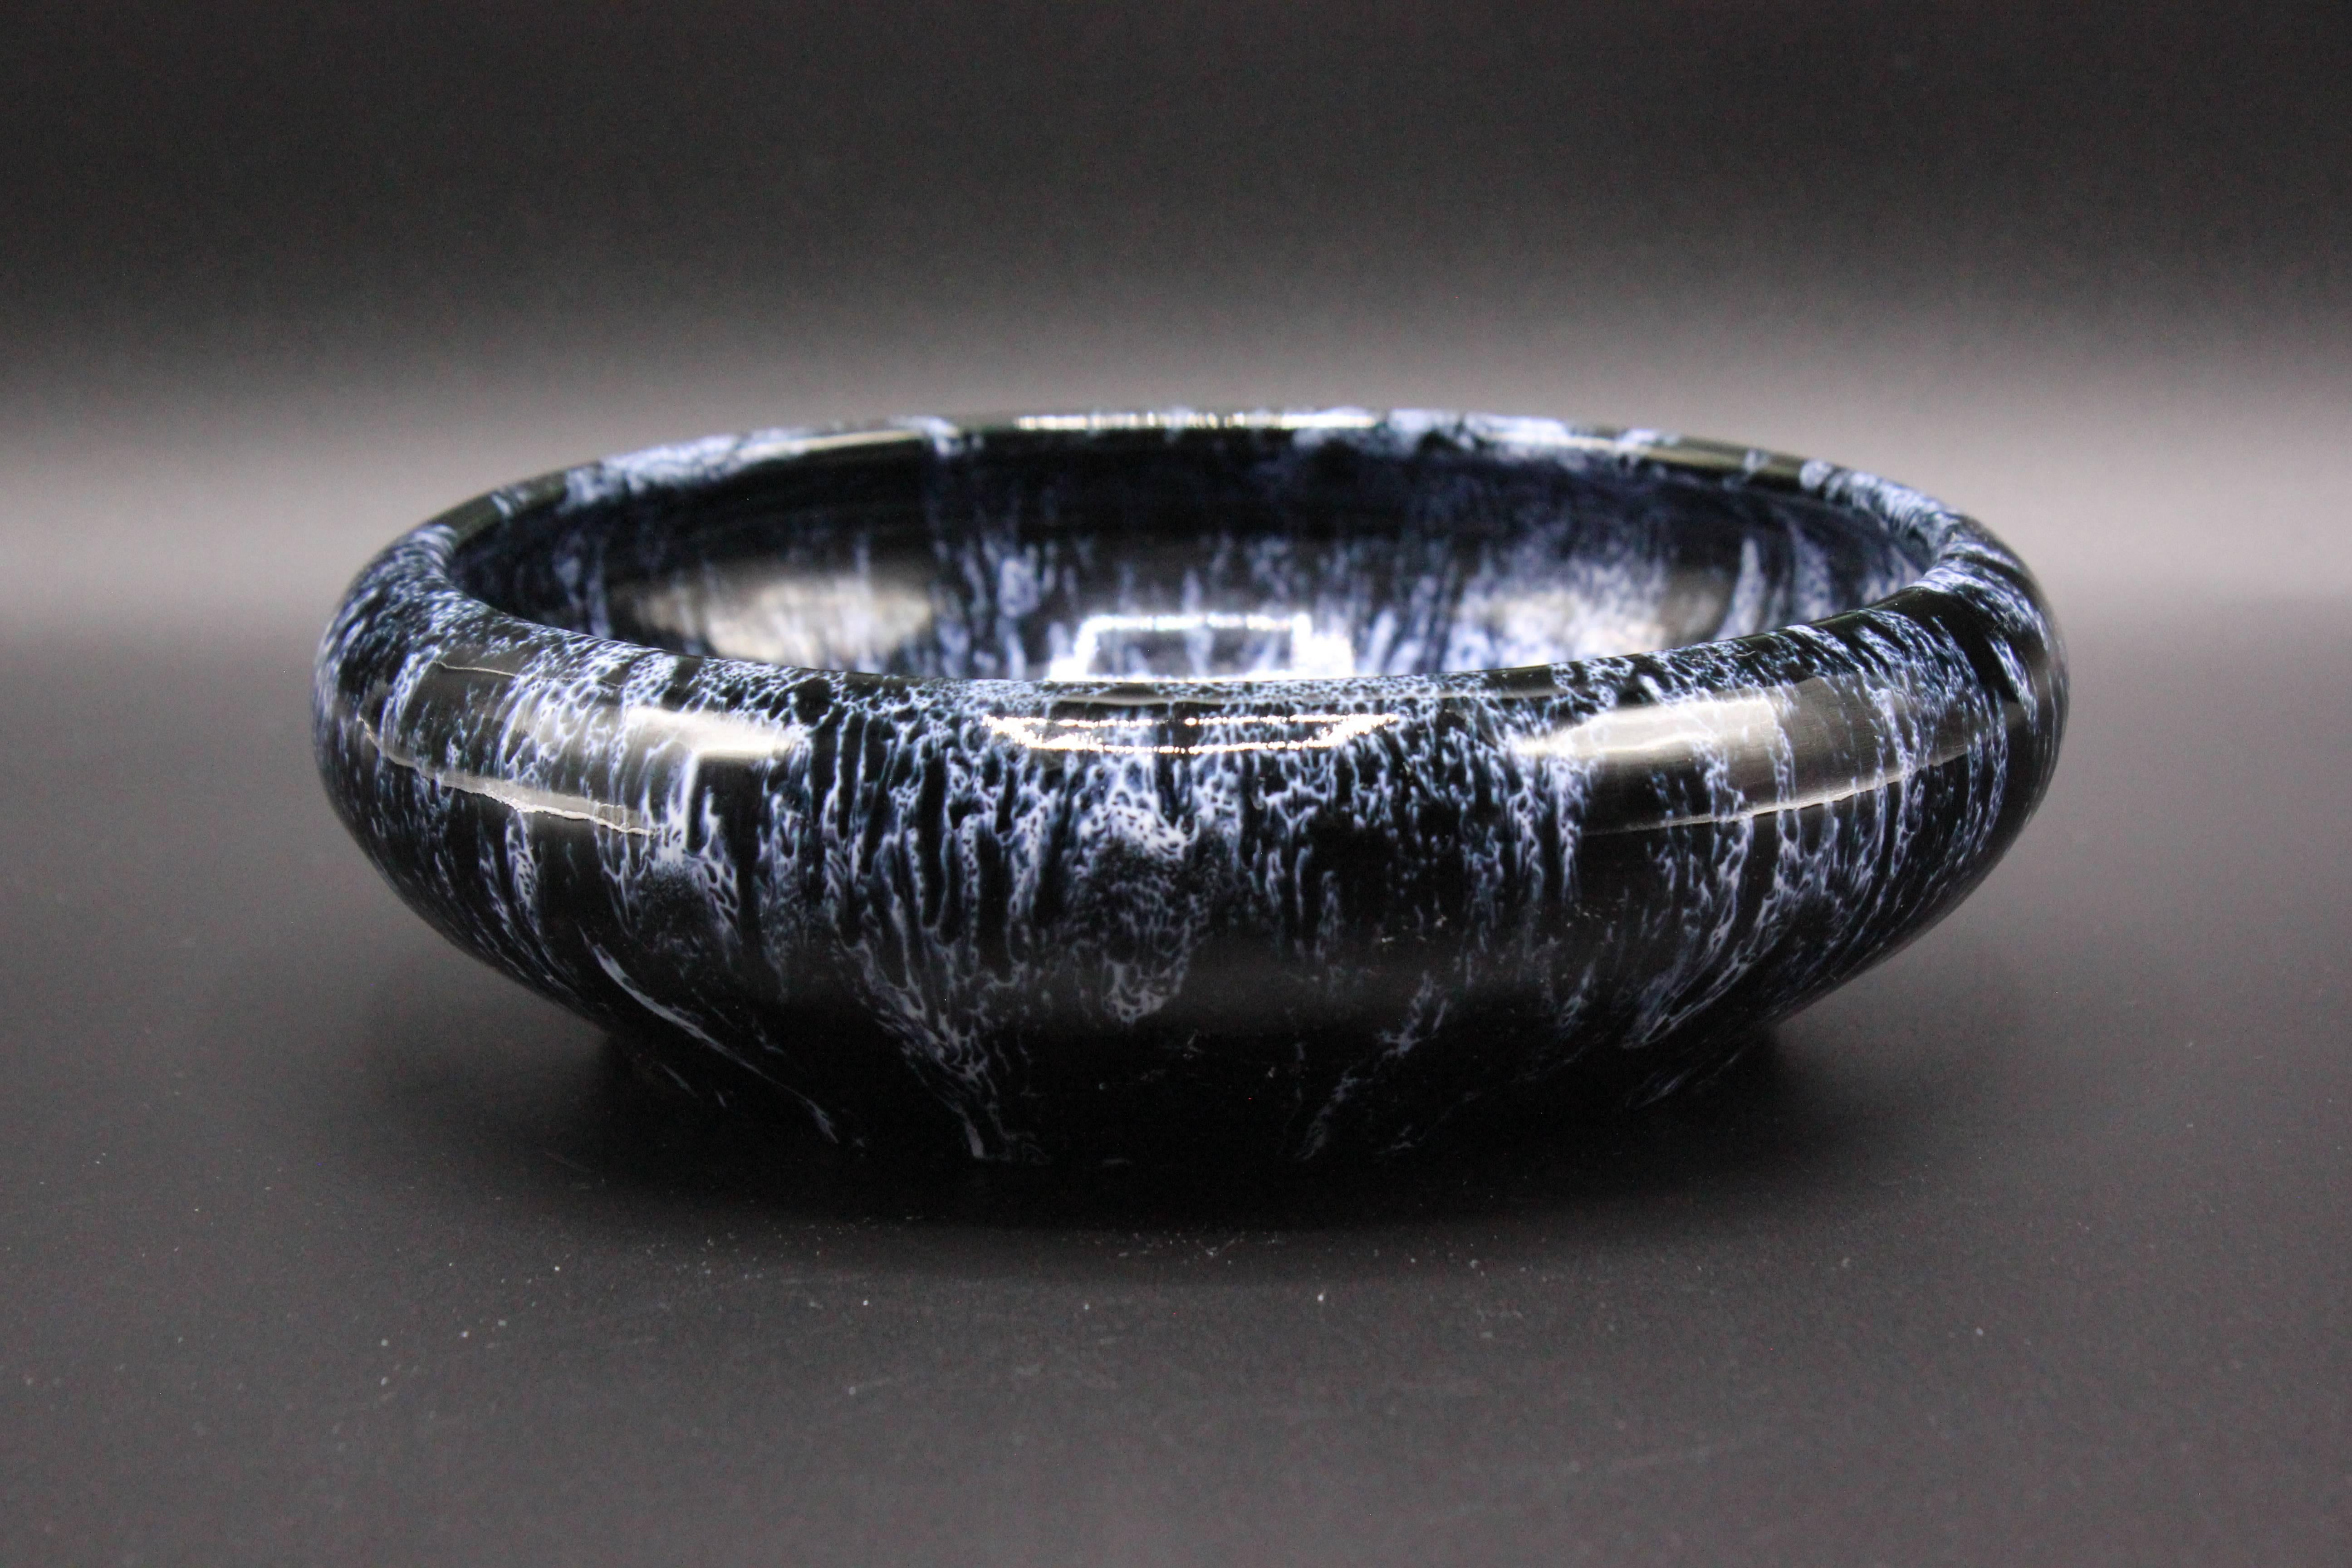 Low Art Deco bowl produced by Boch Freres Keramis in La Louviere, Belgium. Bowl has blue and white drip glaze finish with orange colored center. Printed factory mark with 